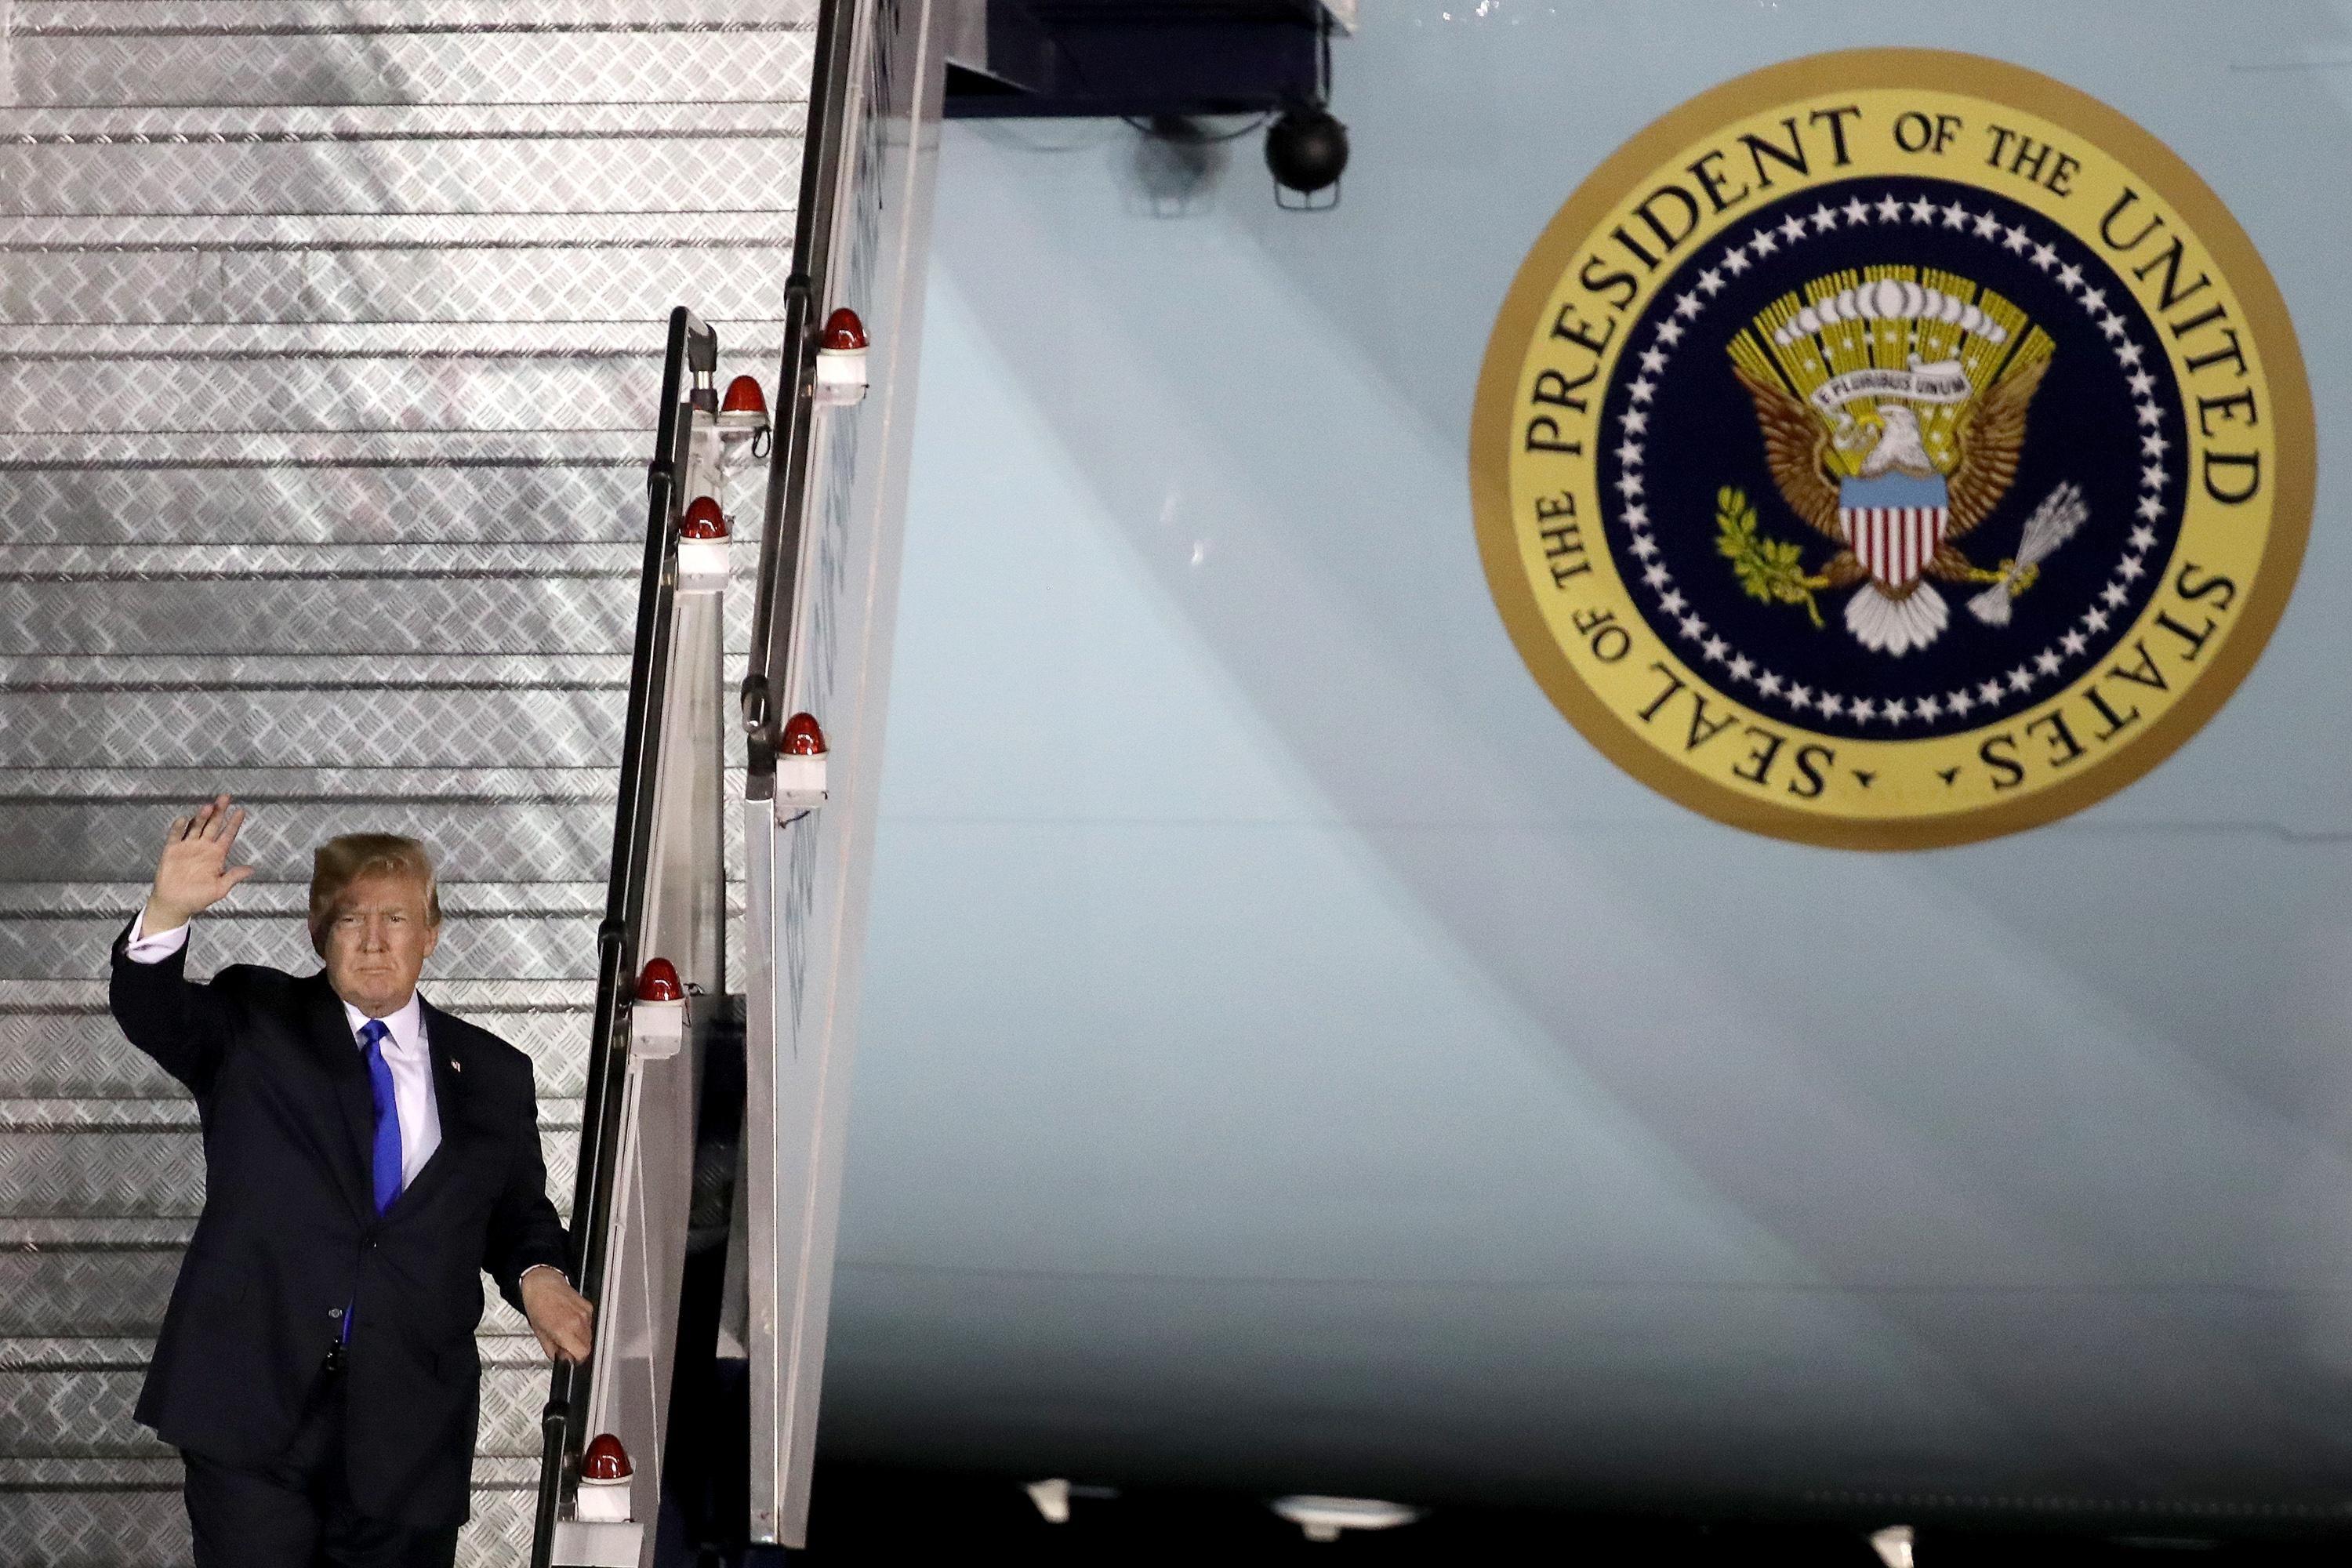 Donald Trump waves as he descends the stairs down from Air Force One.